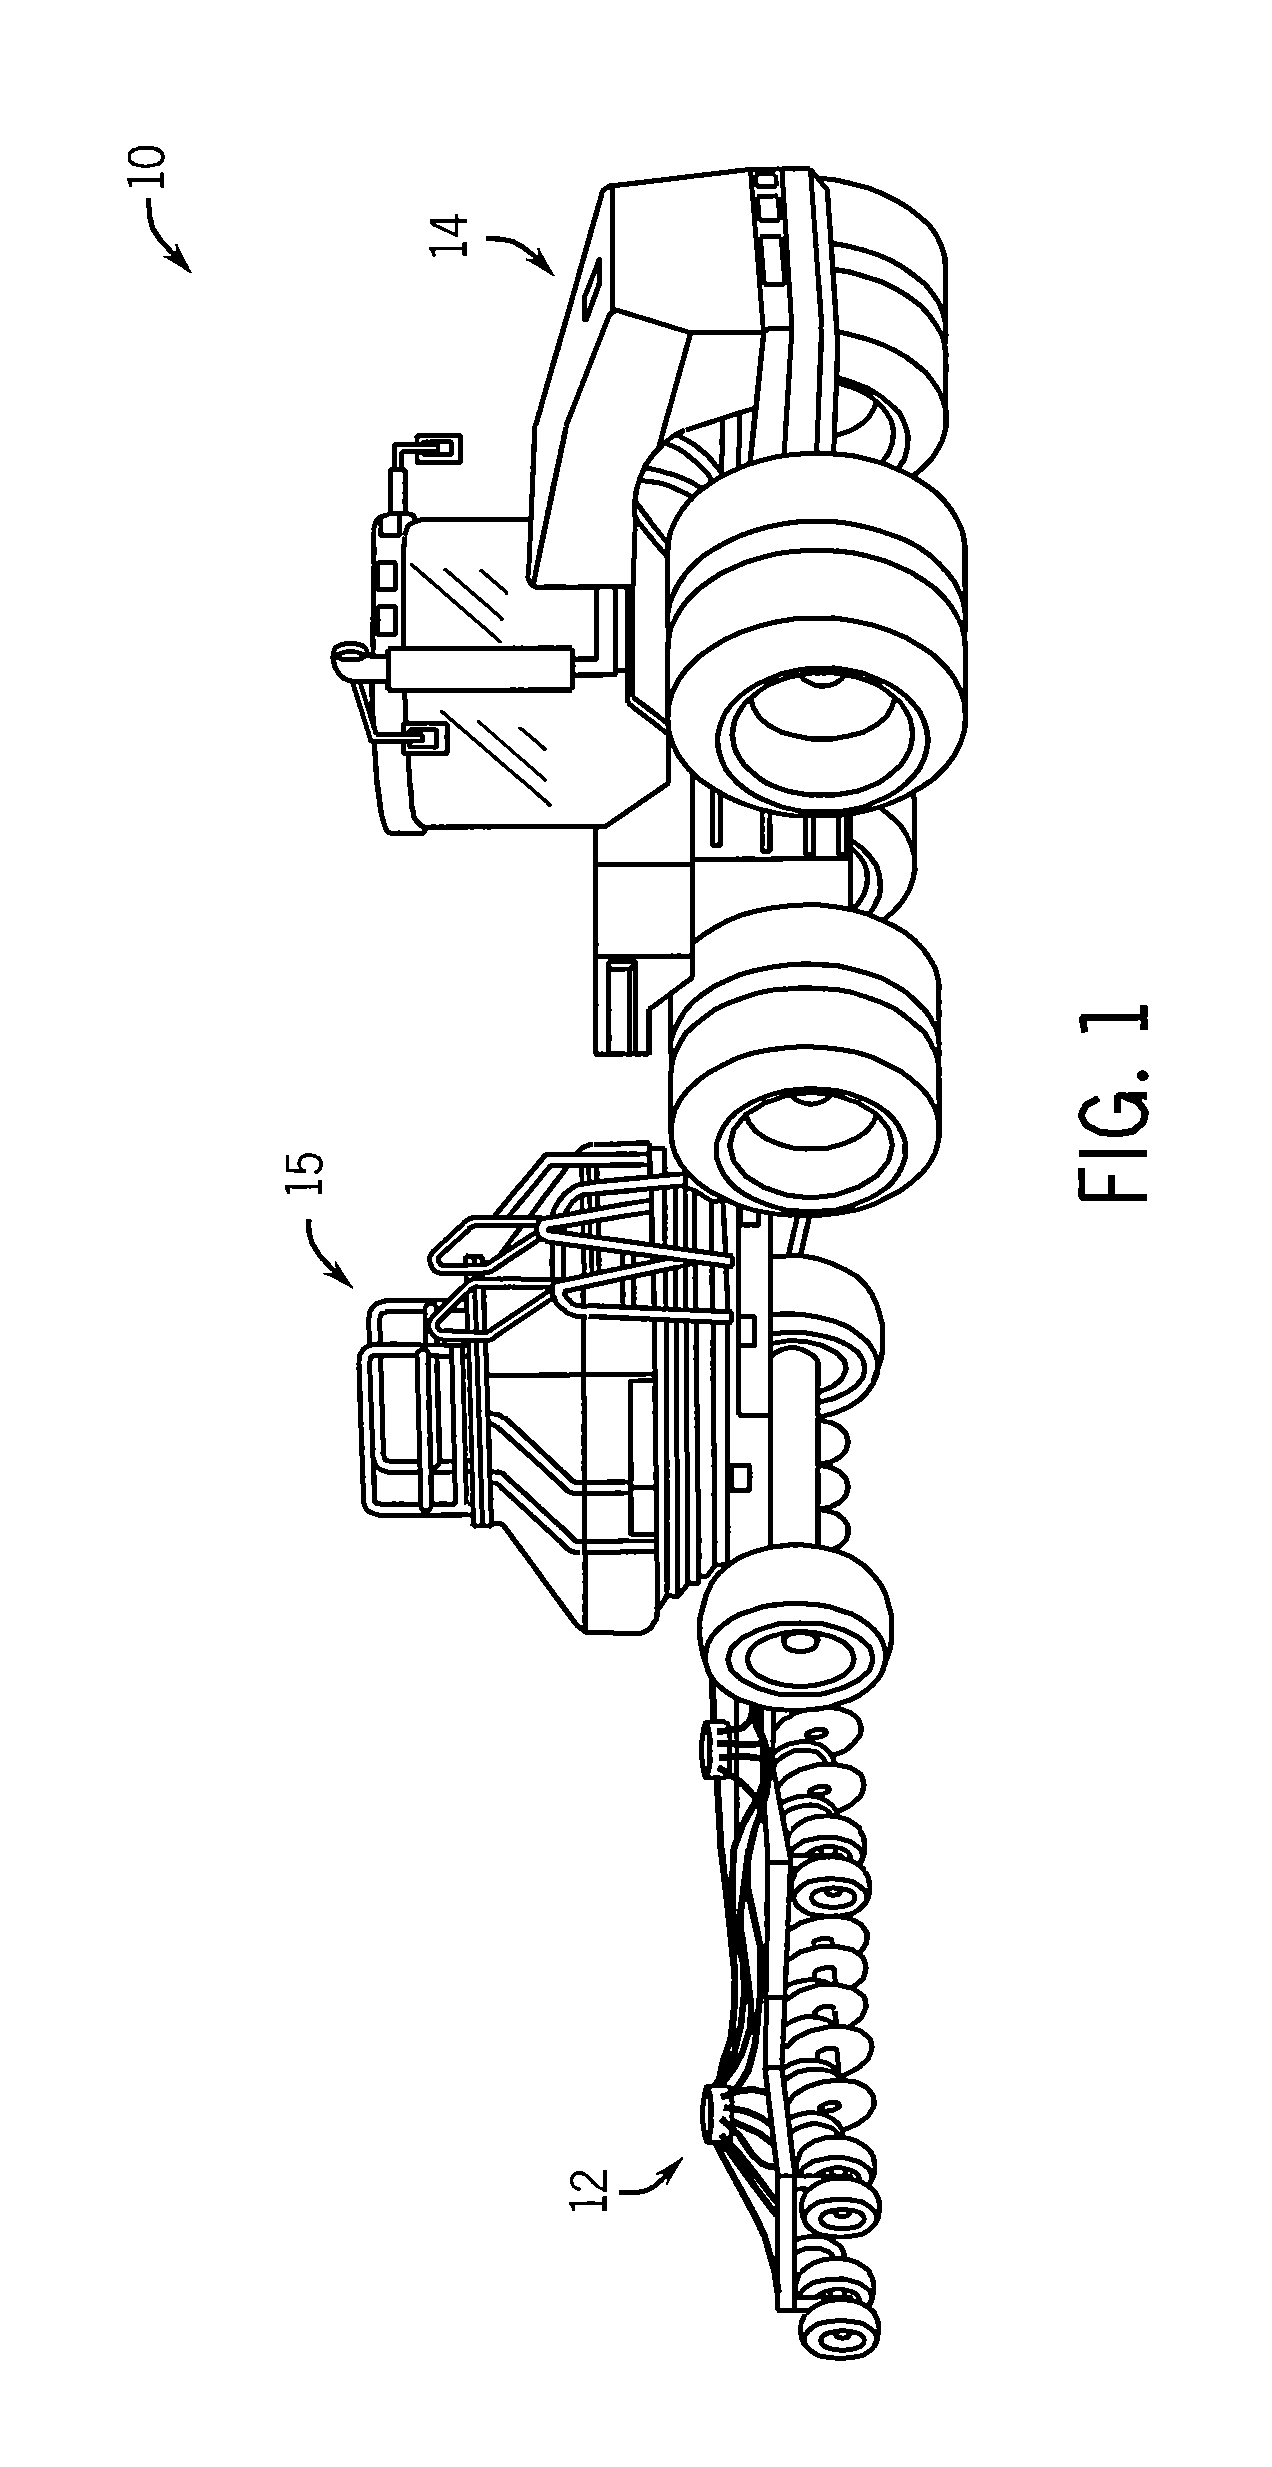 Mechanically Controlled Hydraulic System For An Agricultural Implement